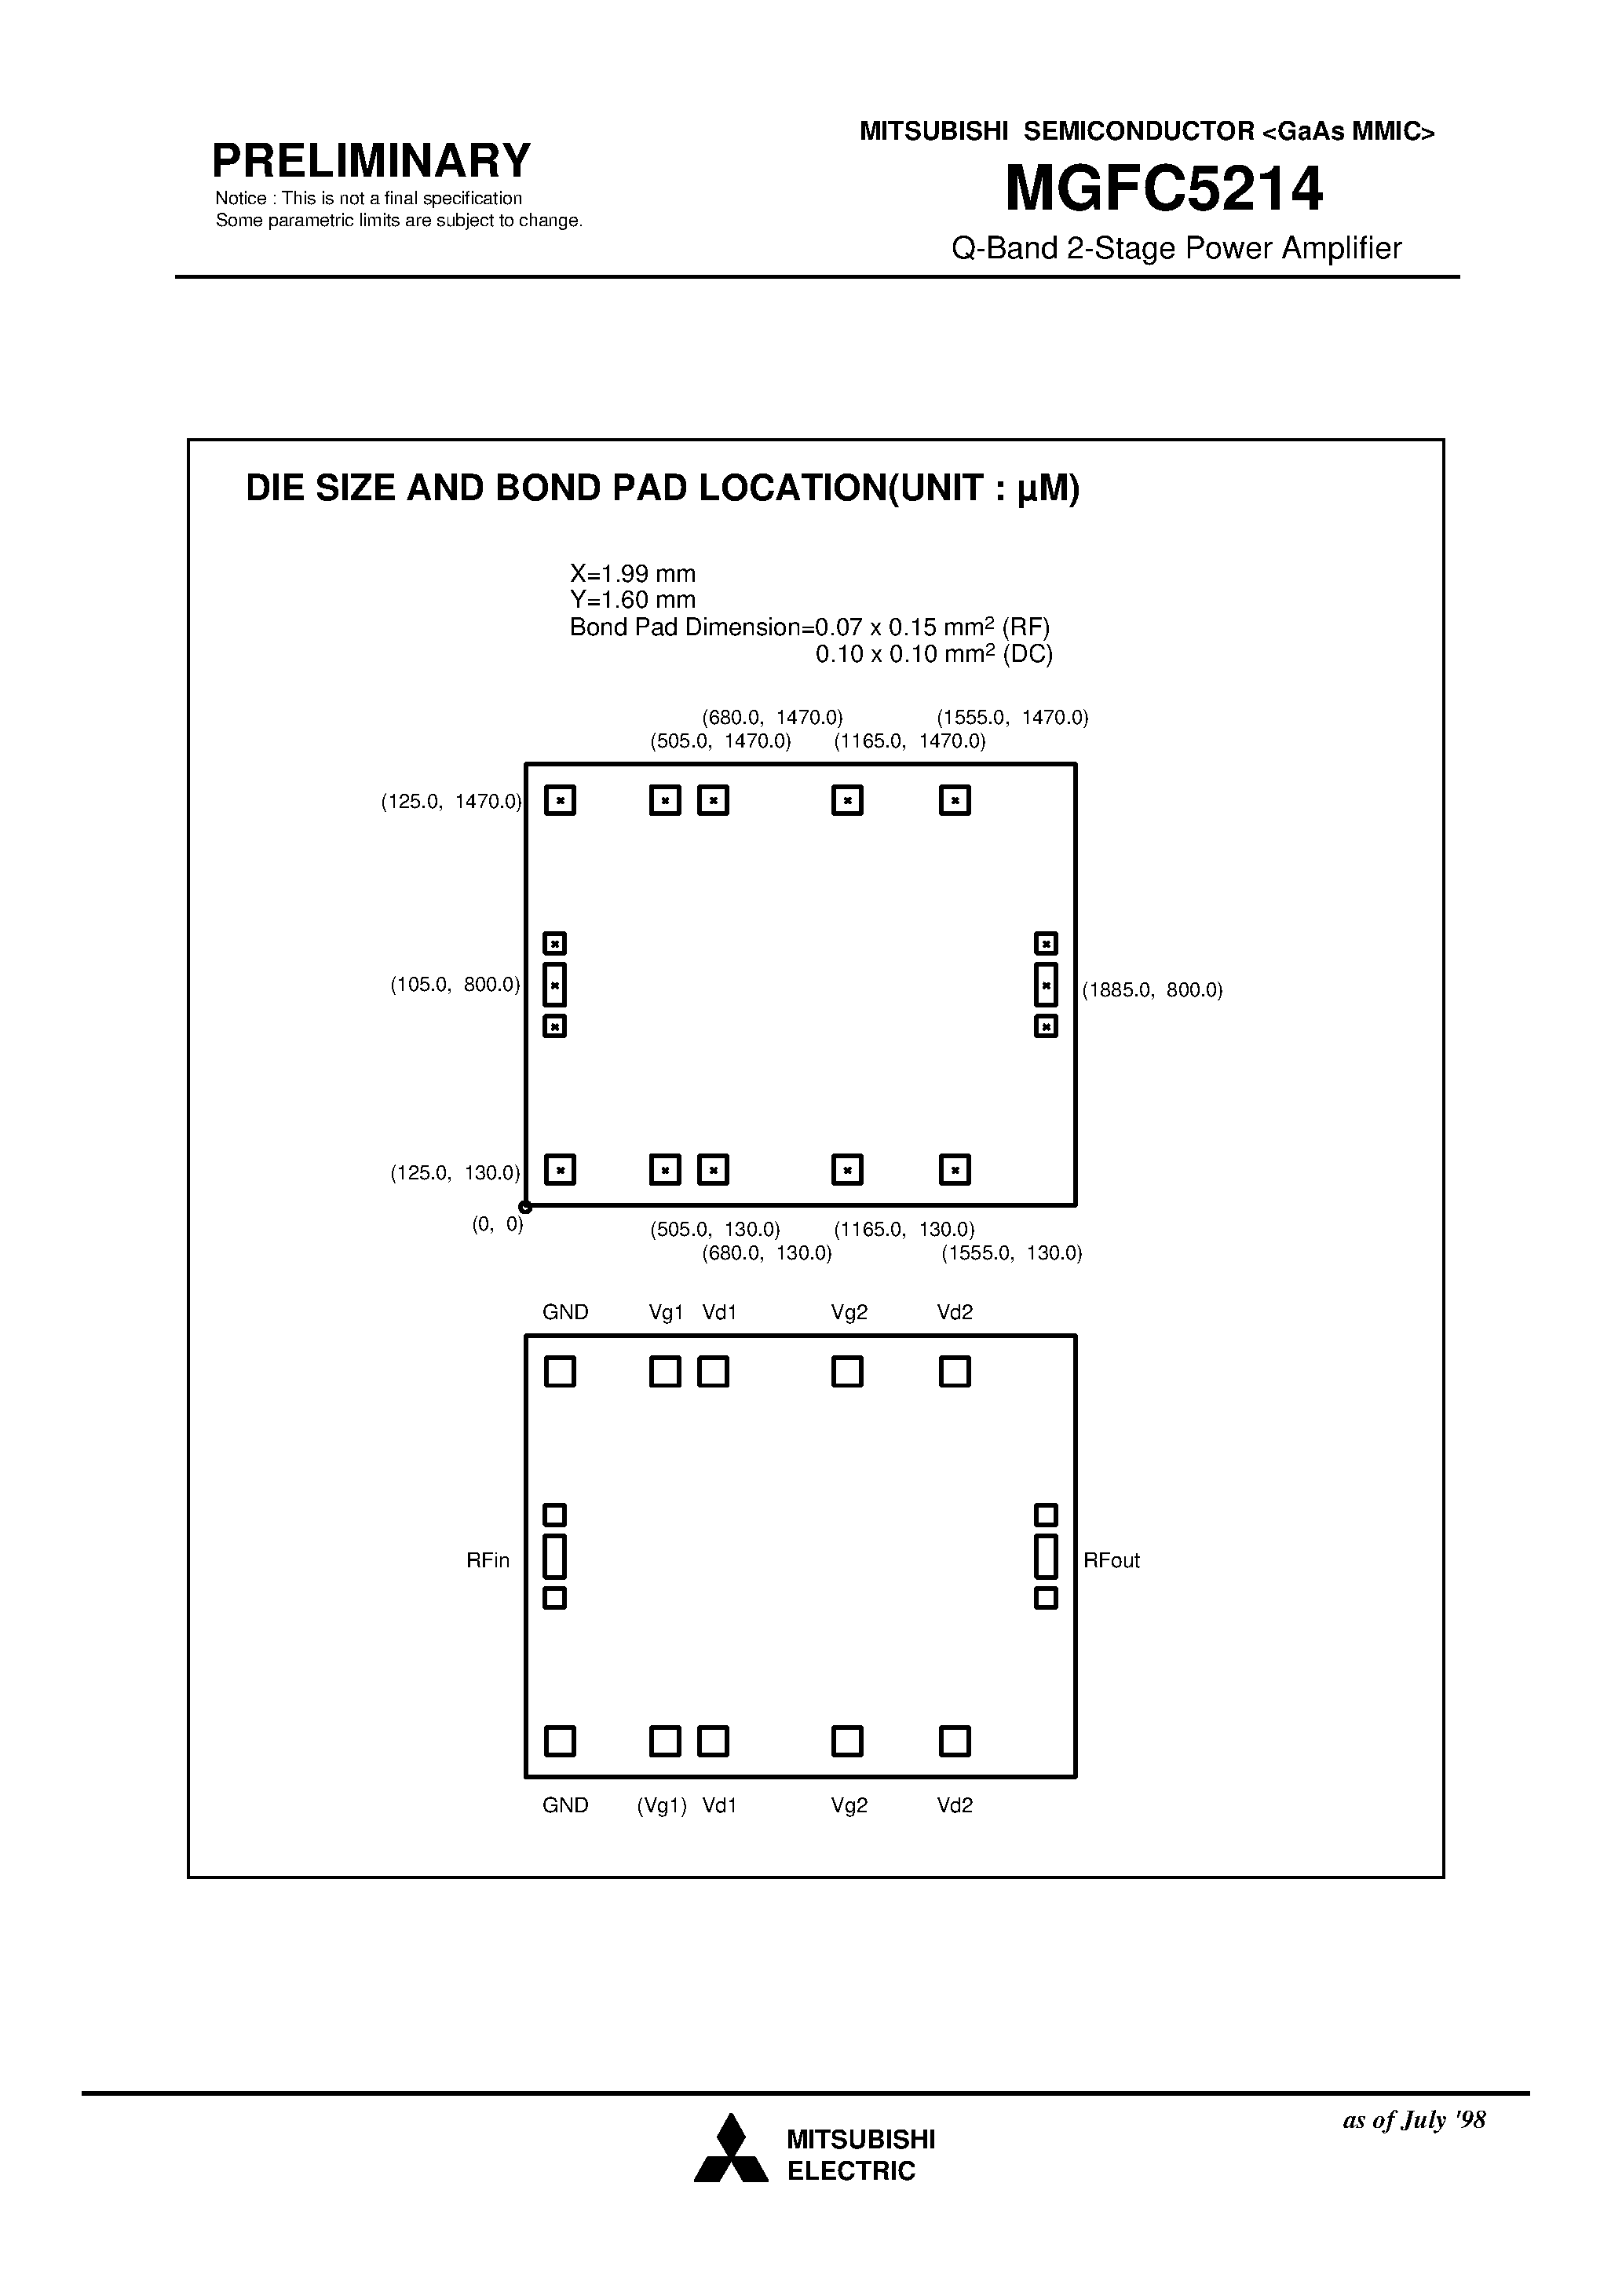 Datasheet MGFC5214 - Q-Band 2-Stage Power Amplifier page 2